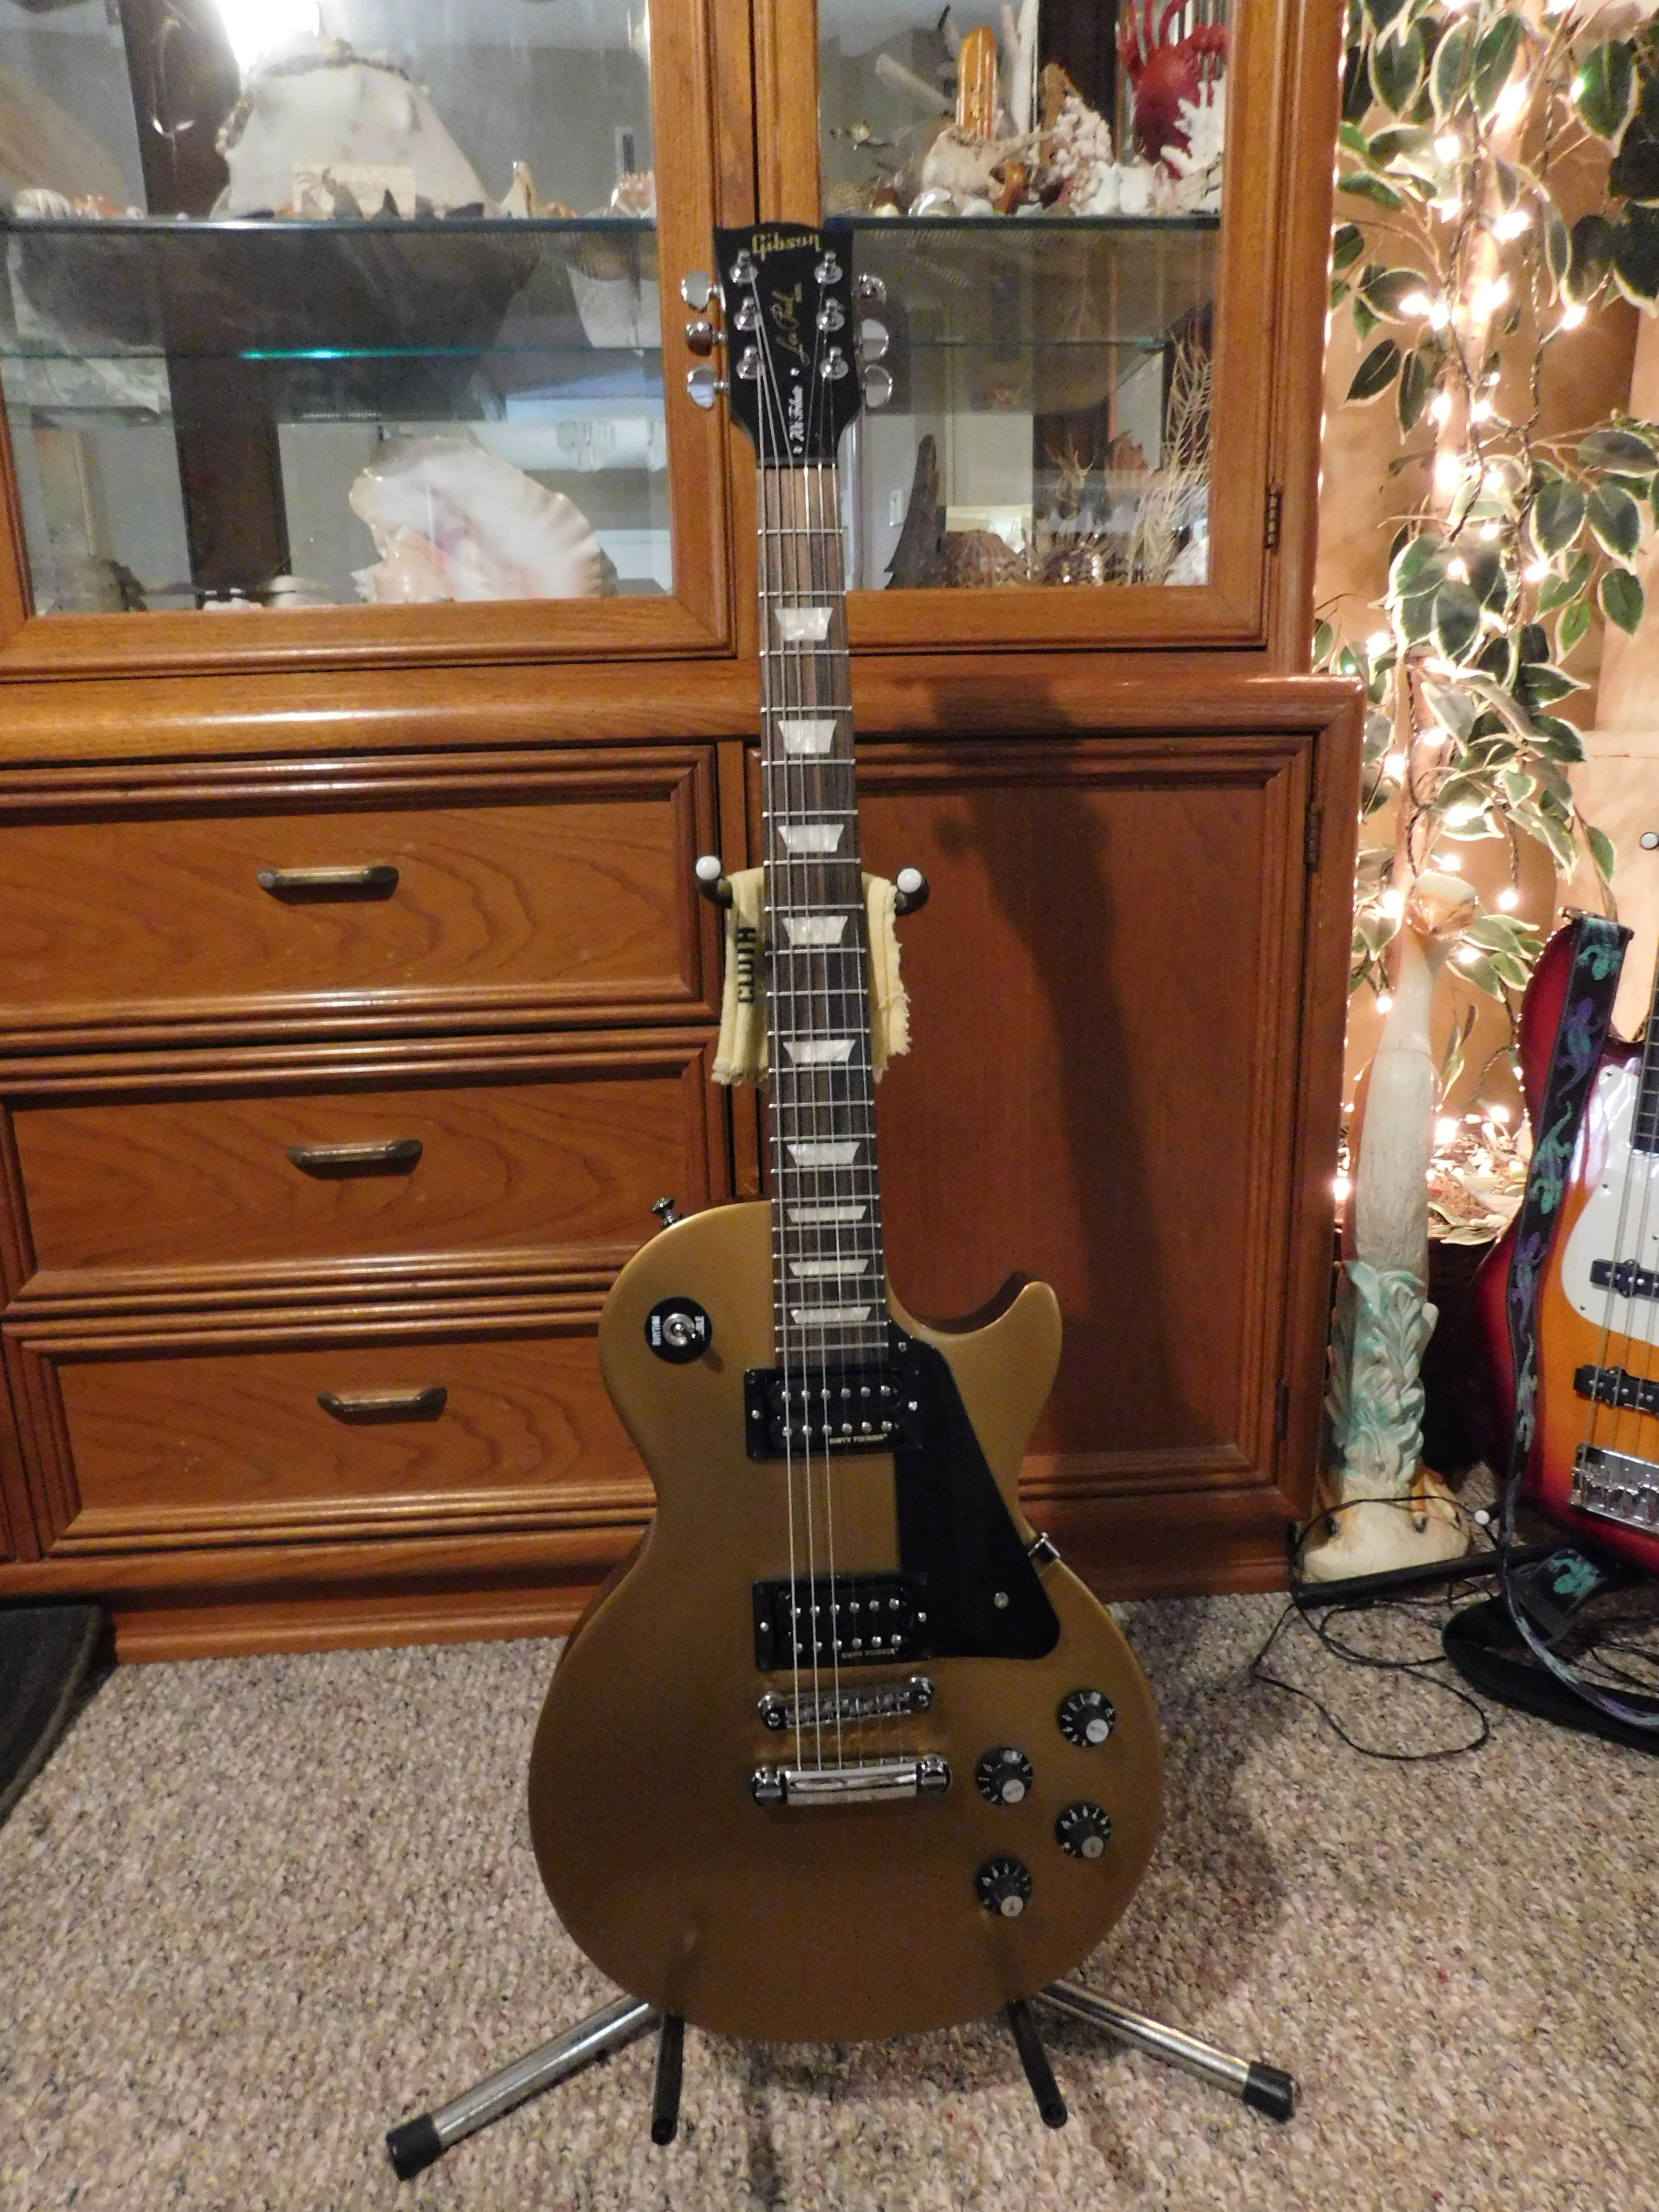 2013 GIBSON 70'S TRIBUTE LES PAUL ELECTRIC GUITAR W/ ORIGINAL GIG BAG . MUSICAL INSTRUMENT. BEAUTIFUL LOOKING AND PLAYING GUITAR.